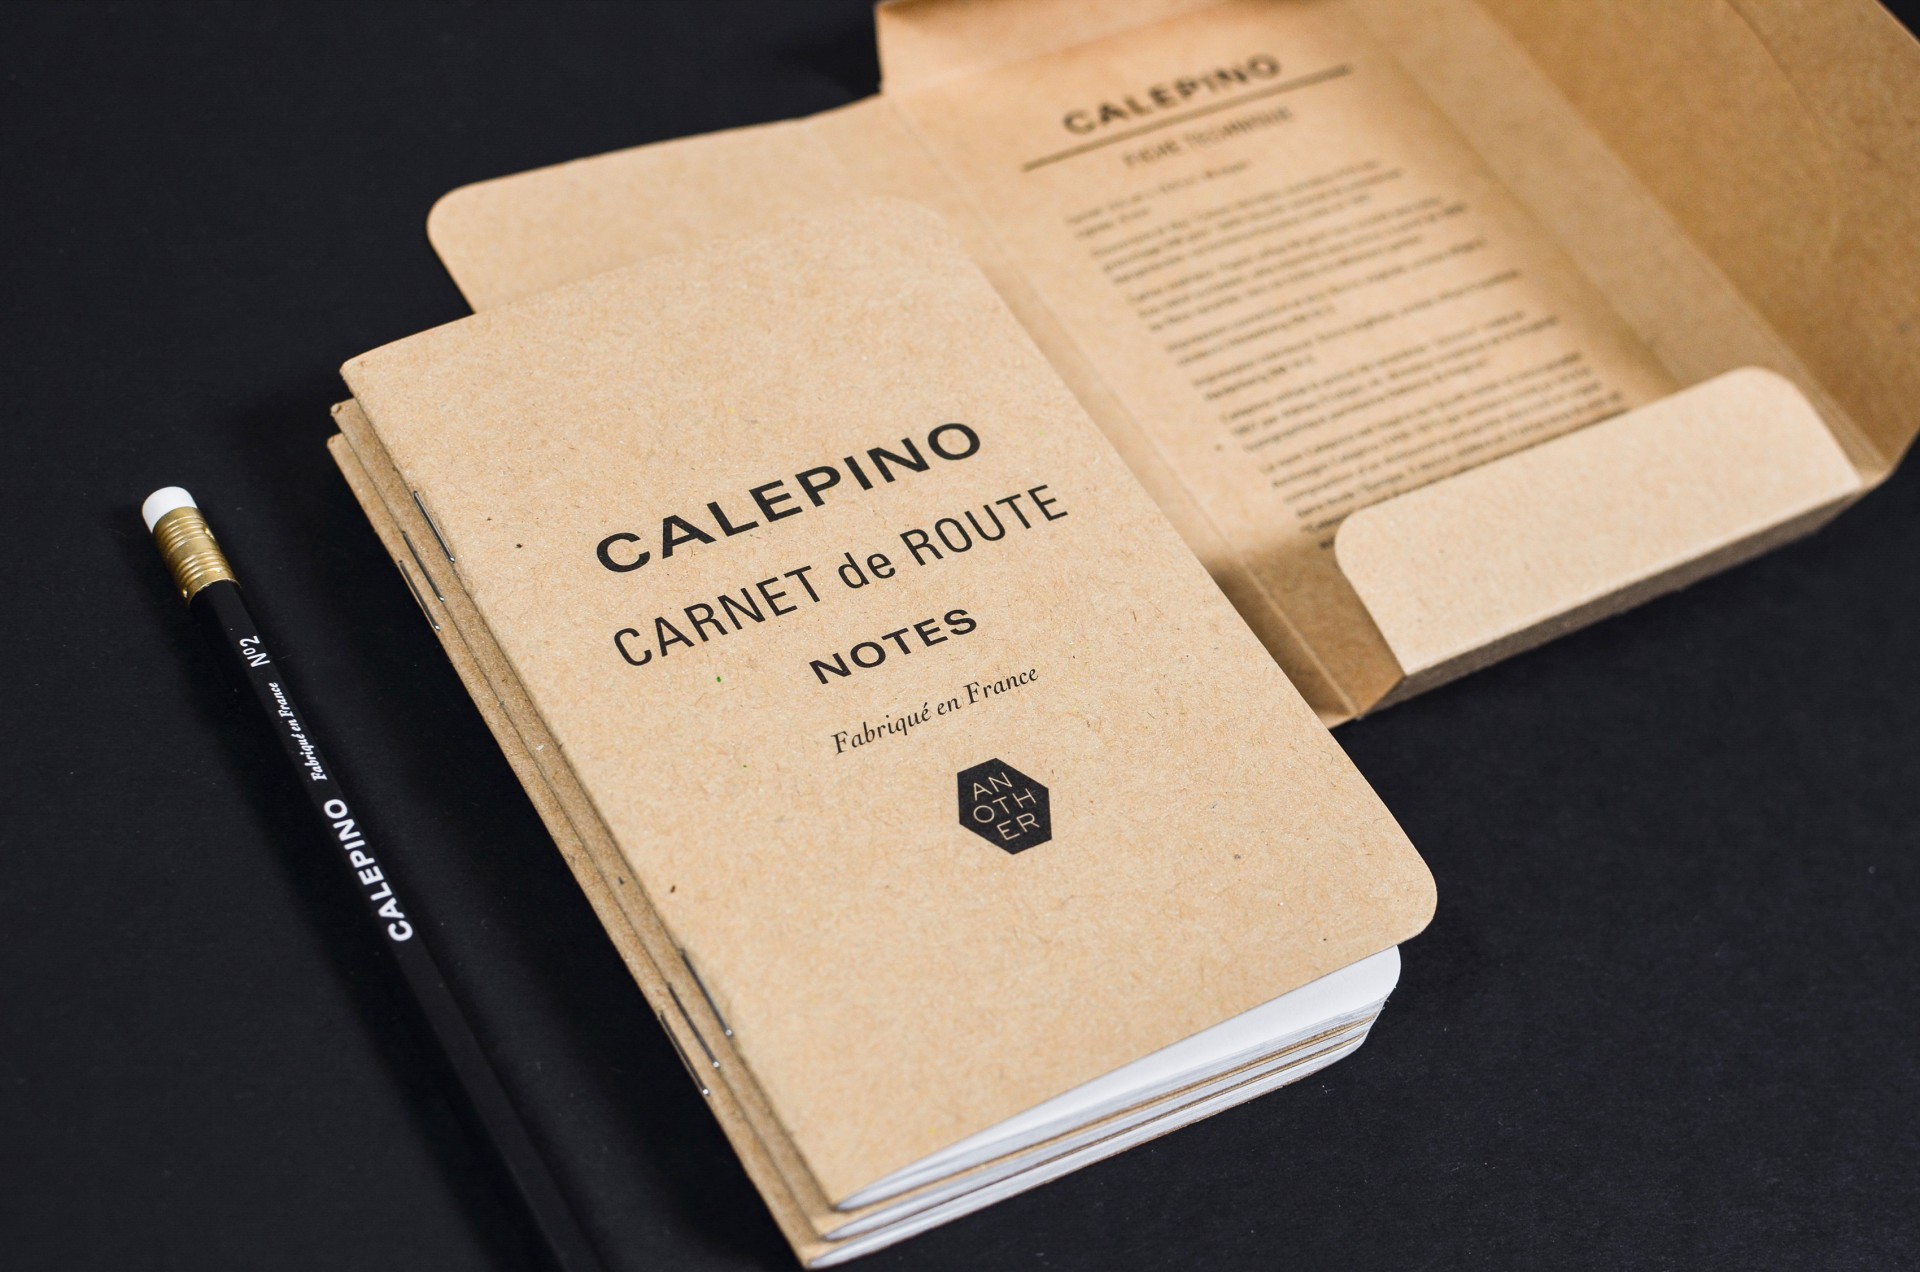 Studio Birdsall - notebook and packaging designs for Calepino × Another Something